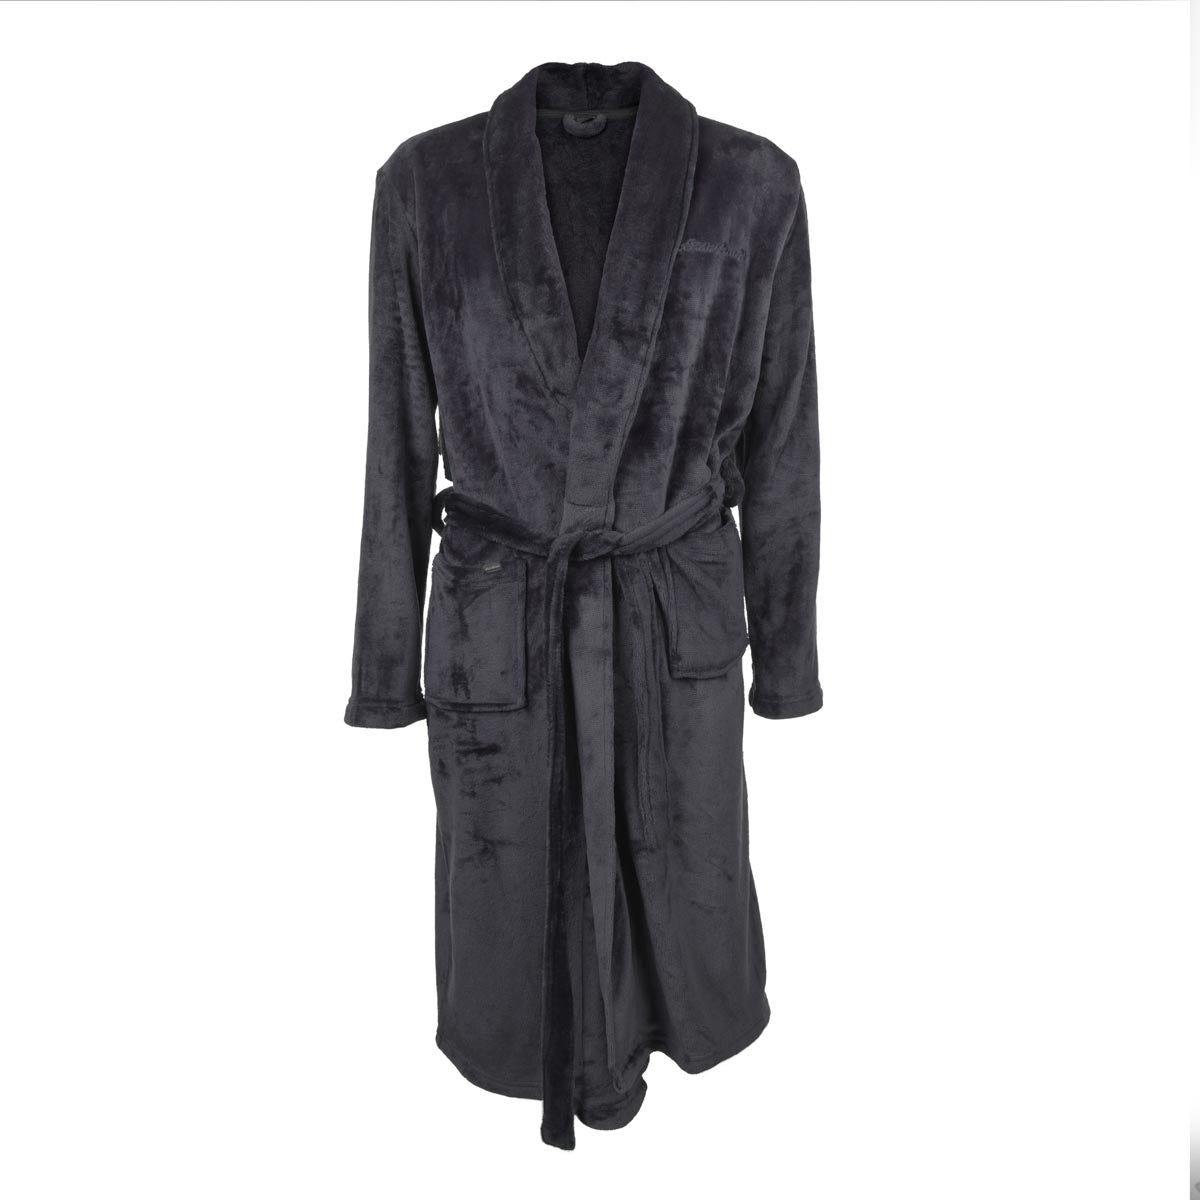 Eddie Bauer men's robe in dark gray, featuring plush fabric with a shawl collar, embroidered logo, tie belt, and two front pockets.